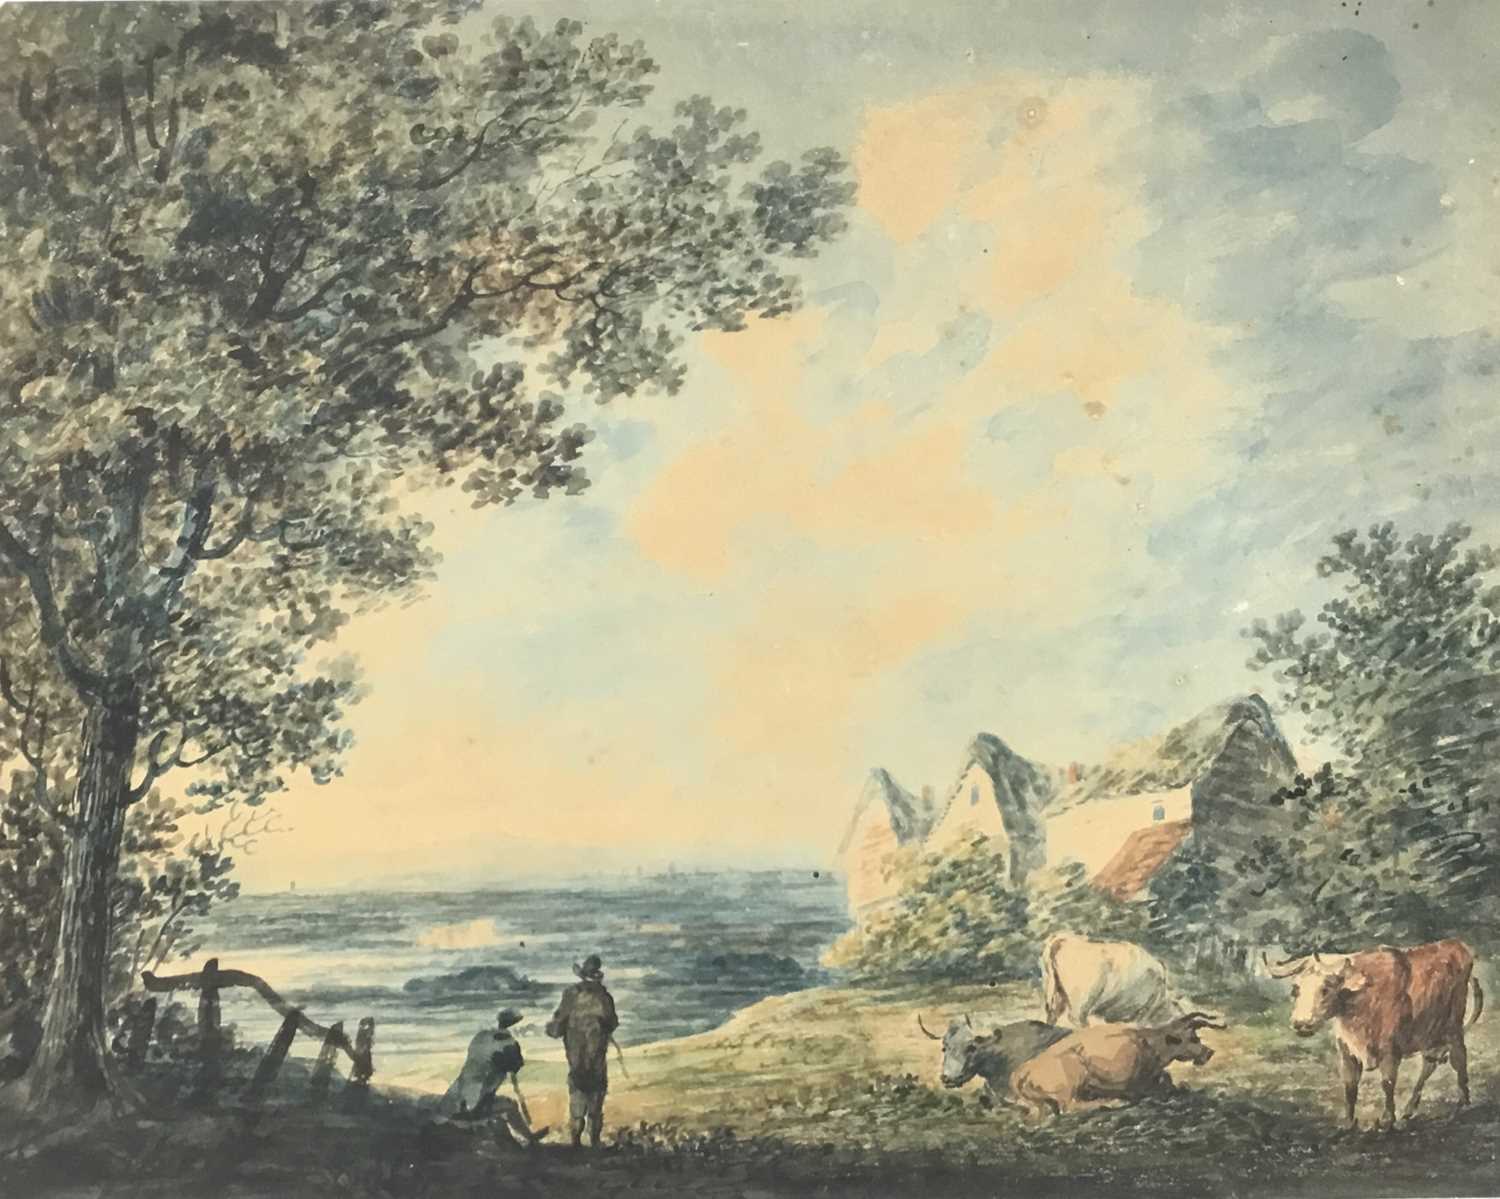 Lot 104 - Attributed to John Robert Cozens, watercolour - extensive landscape with figures and animals, 25cm x 32cm, unframed